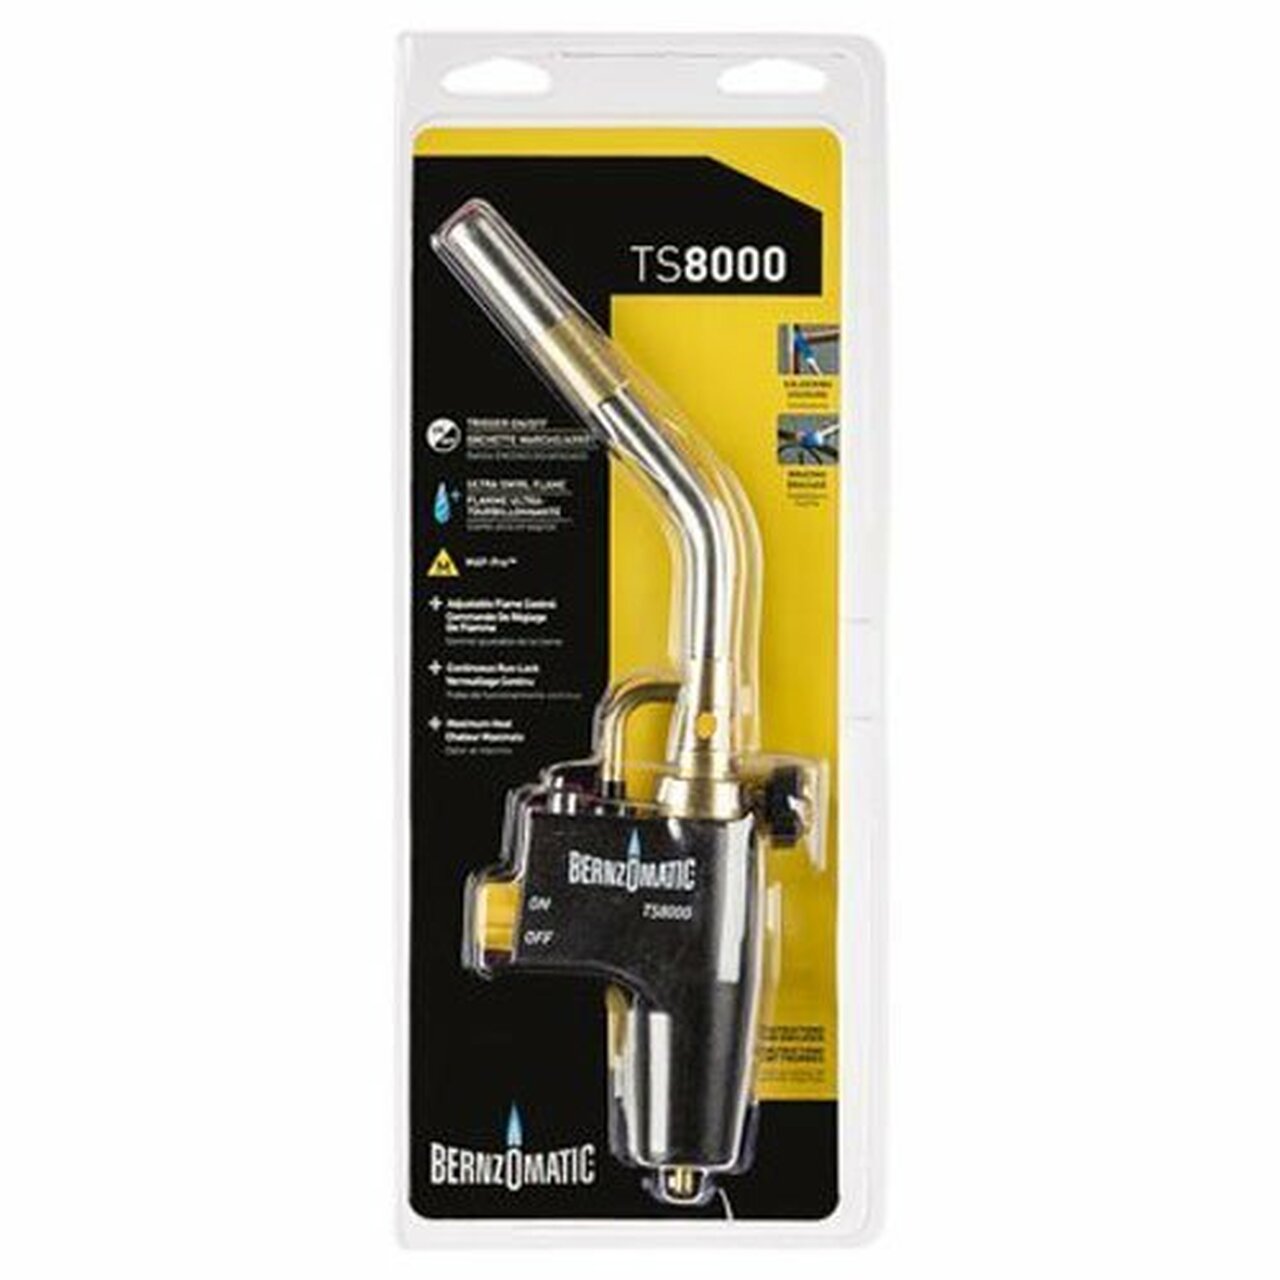 Bernzomatic Torch Head Ts8000 Soldering High Intensity Trigger Start Torch  Gas Sporting Goods Camping & Hiking Headlamps romeinformation.it